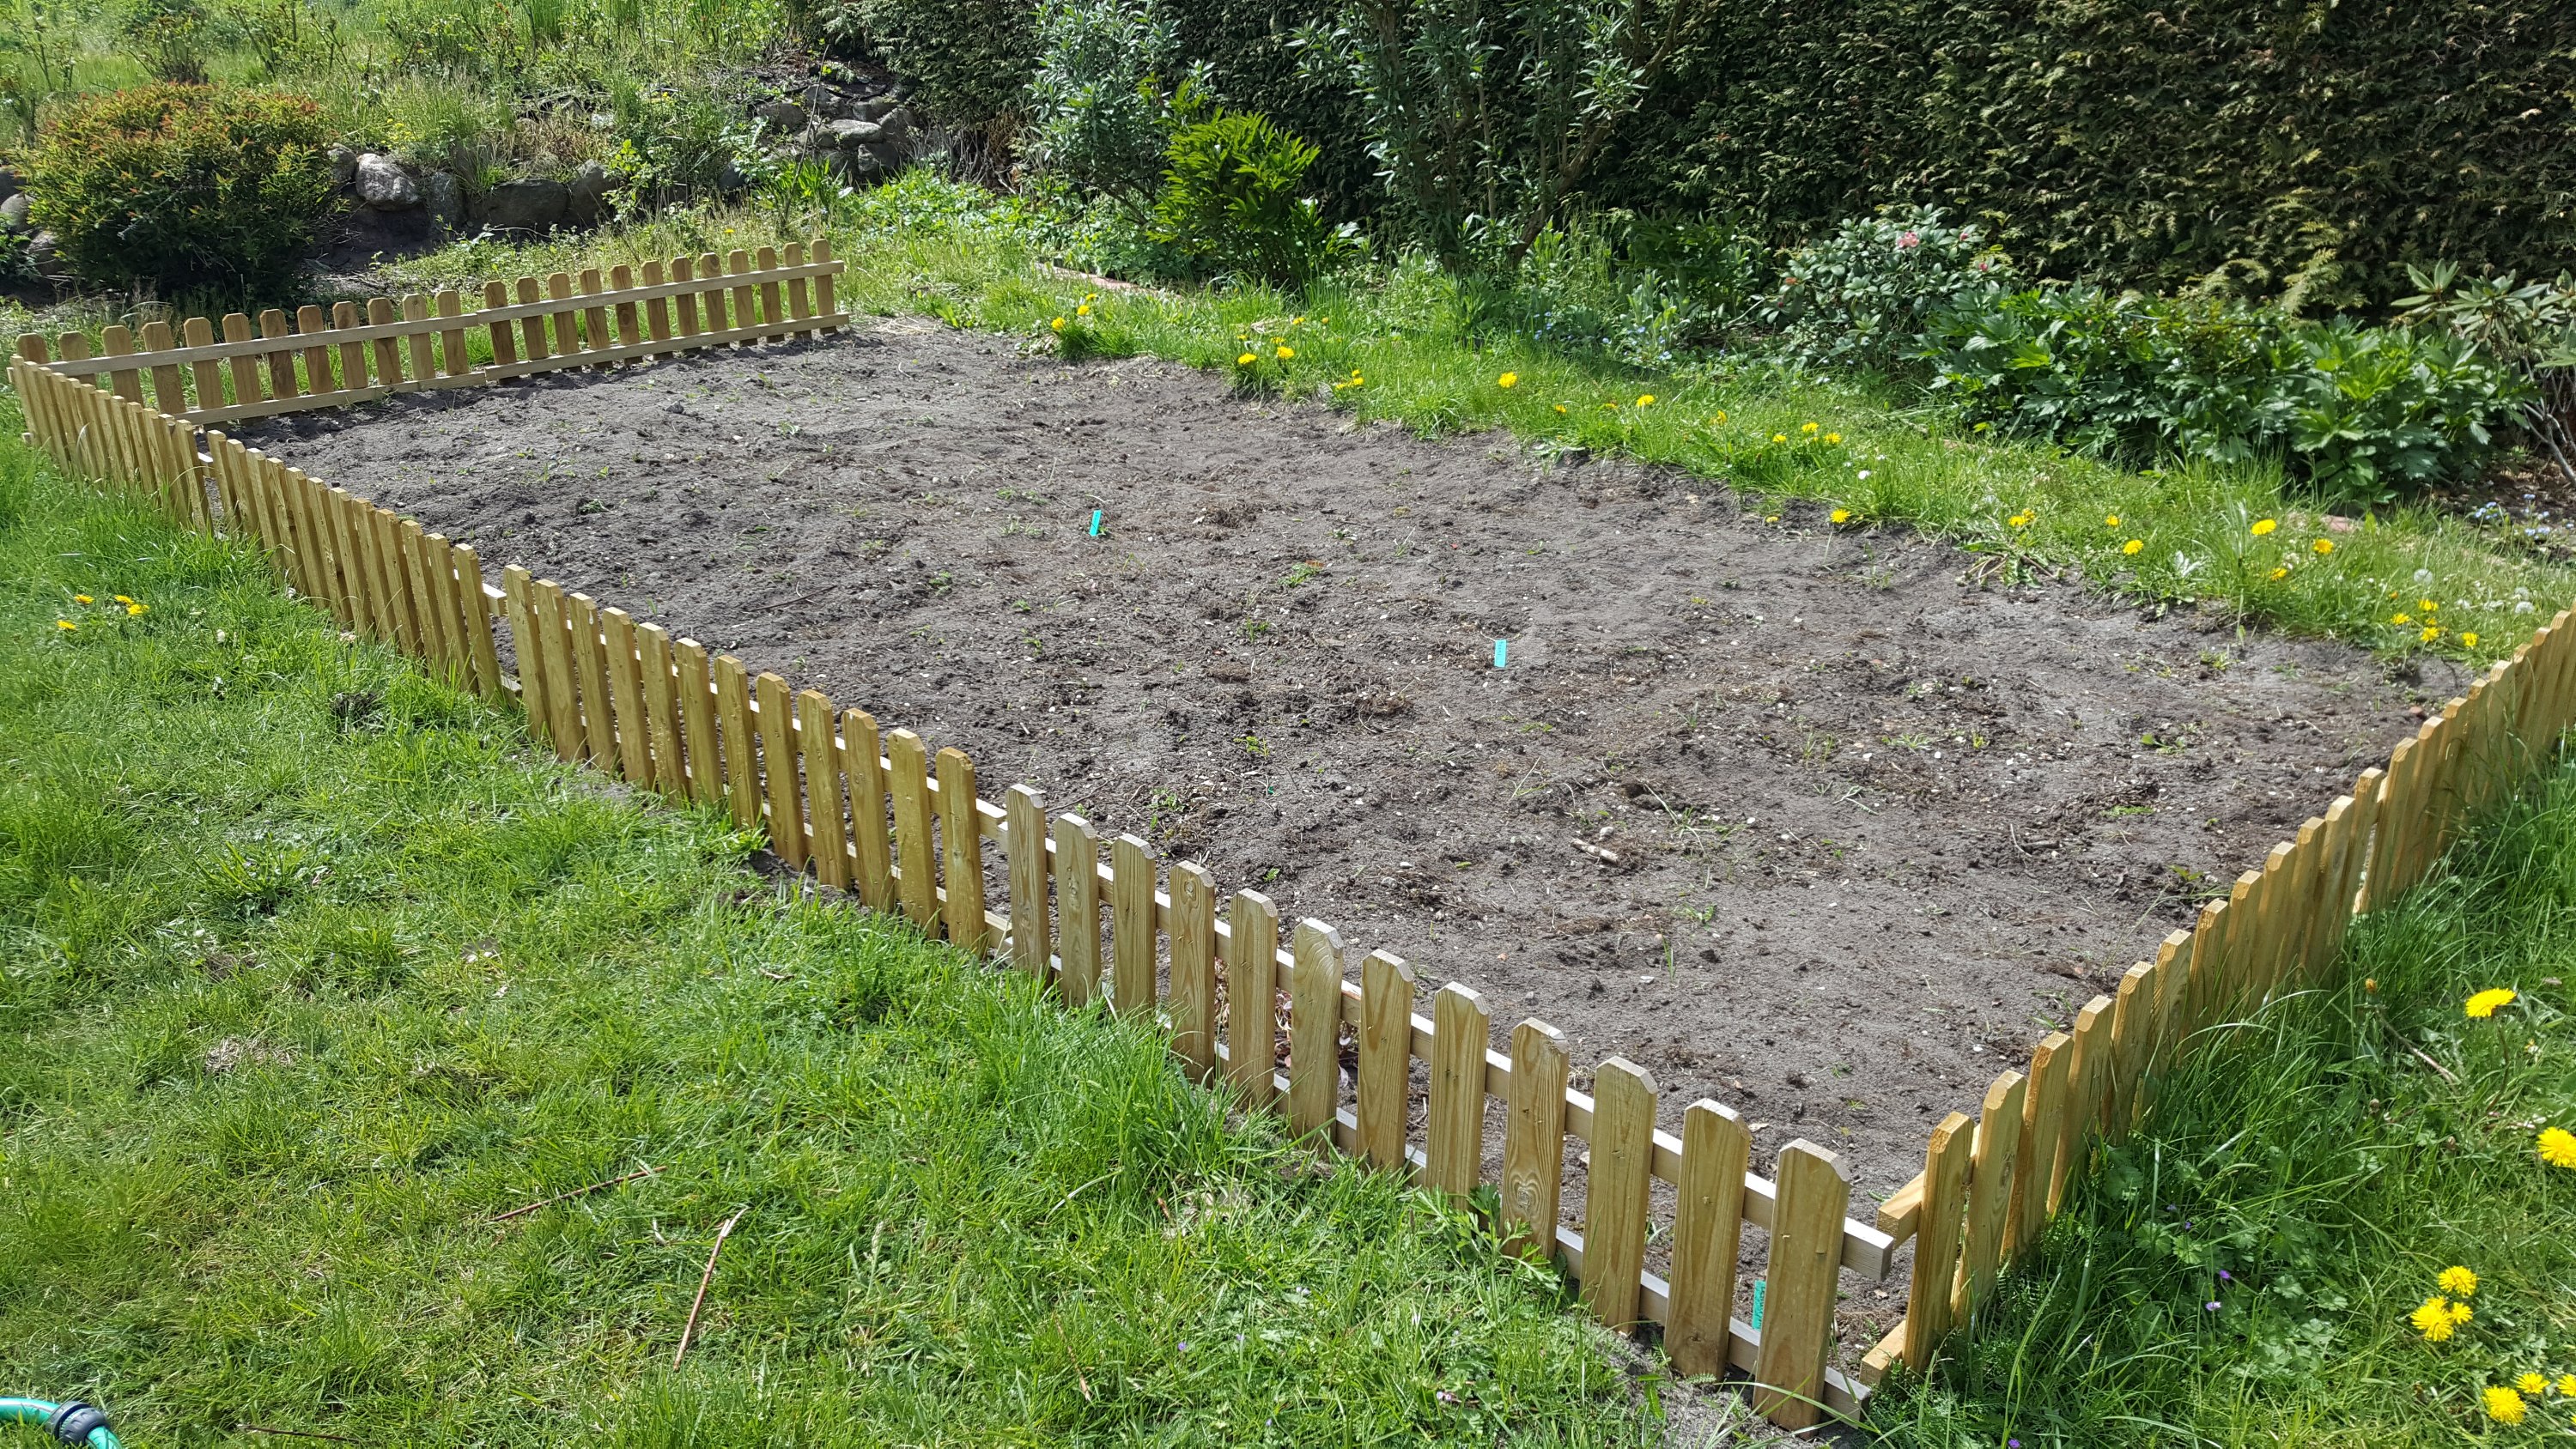 Right vegetable bed.